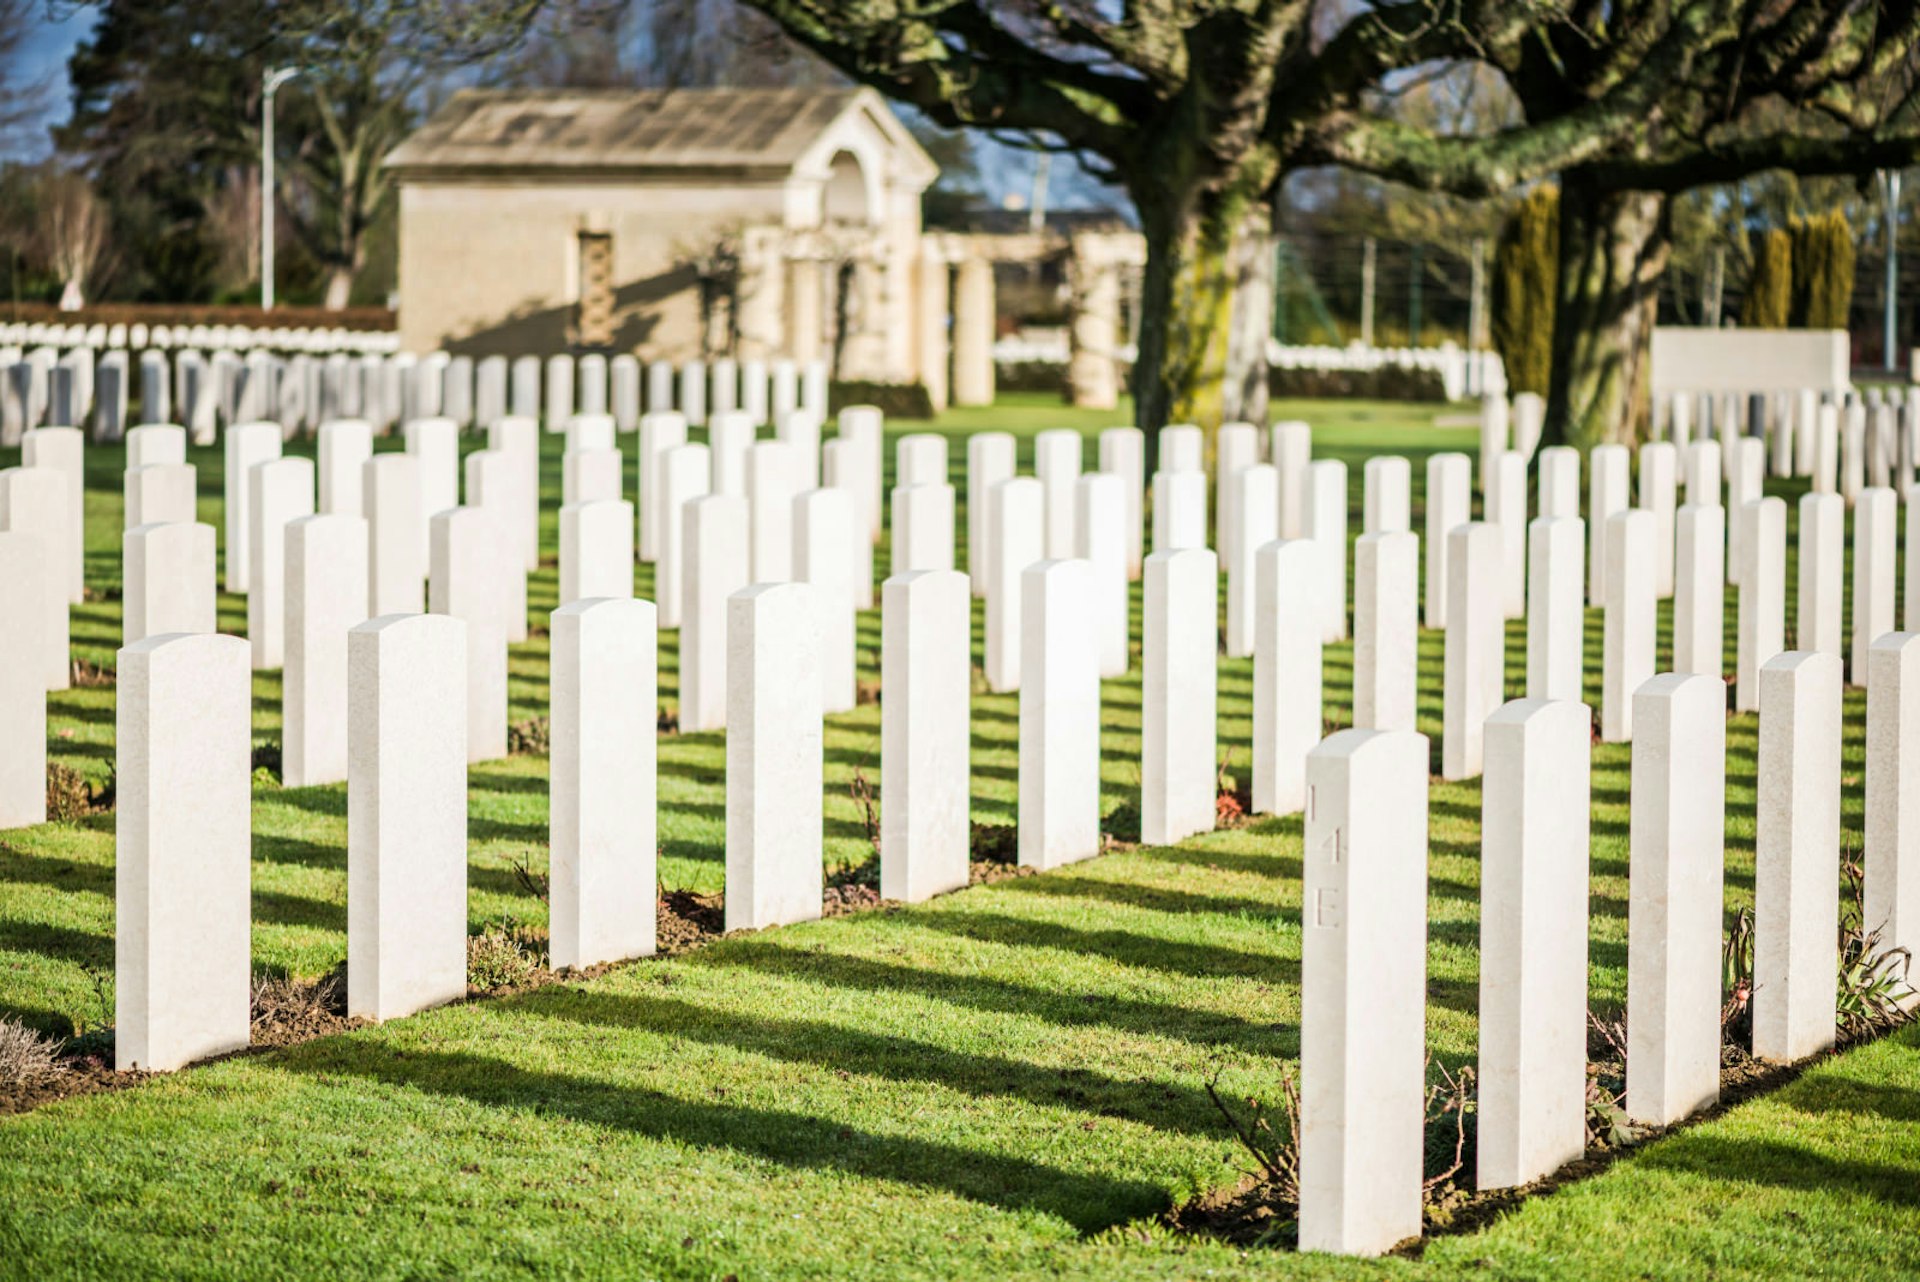 Rows of gravestones stand starkly on a sunny day at the Bayeux War Cemetery